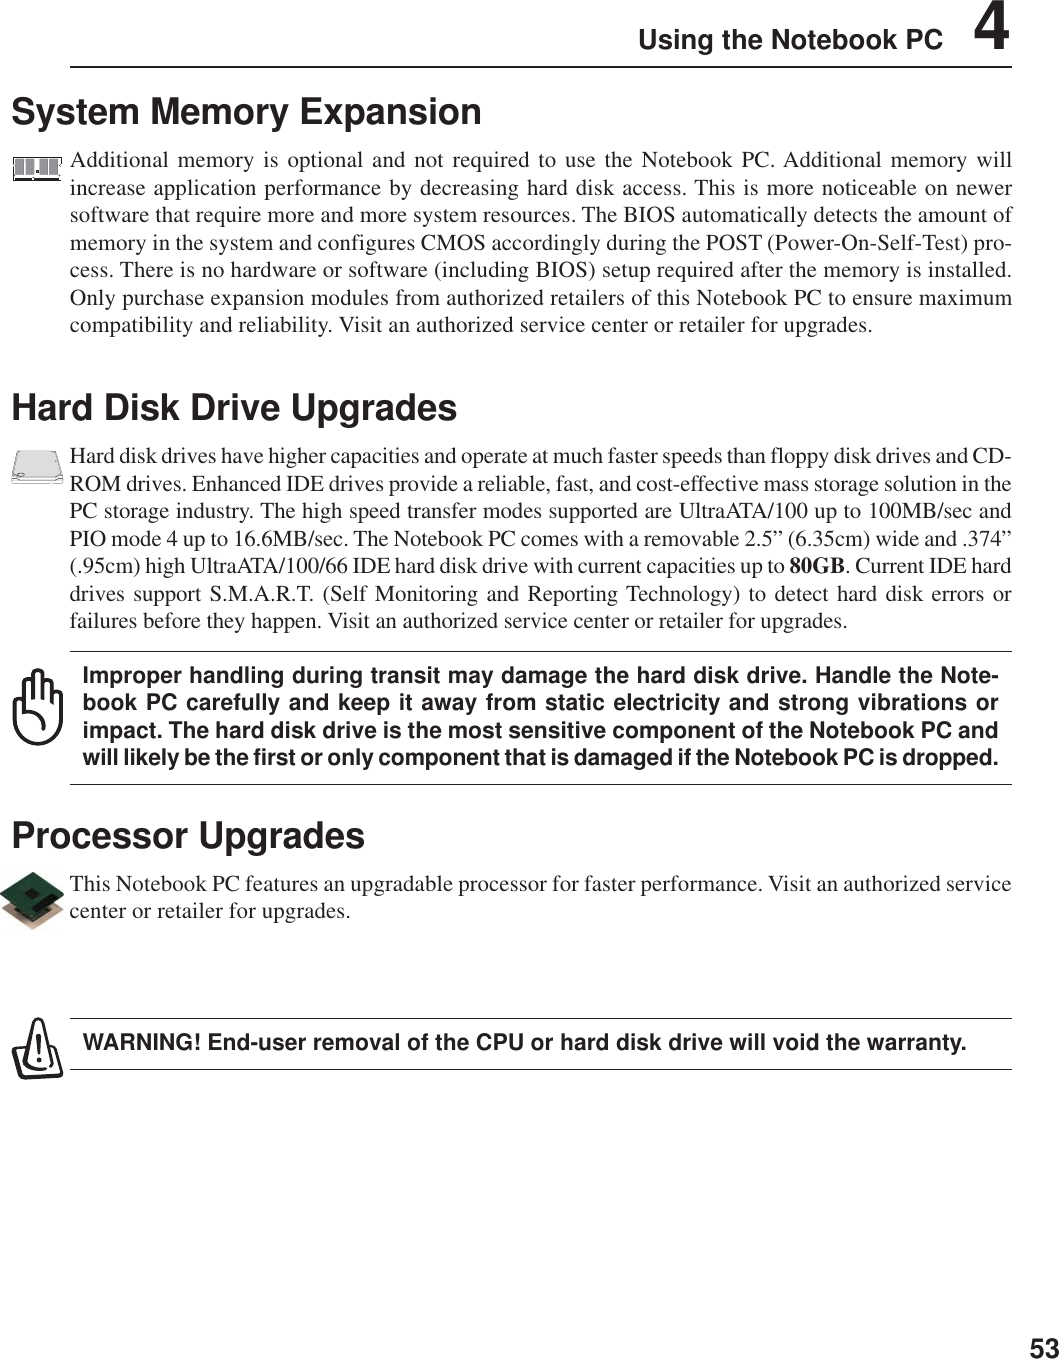 53Using the Notebook PC    4Hard Disk Drive UpgradesHard disk drives have higher capacities and operate at much faster speeds than floppy disk drives and CD-ROM drives. Enhanced IDE drives provide a reliable, fast, and cost-effective mass storage solution in thePC storage industry. The high speed transfer modes supported are UltraATA/100 up to 100MB/sec andPIO mode 4 up to 16.6MB/sec. The Notebook PC comes with a removable 2.5” (6.35cm) wide and .374”(.95cm) high UltraATA/100/66 IDE hard disk drive with current capacities up to 80GB. Current IDE harddrives support S.M.A.R.T. (Self Monitoring and Reporting Technology) to detect hard disk errors orfailures before they happen. Visit an authorized service center or retailer for upgrades.Improper handling during transit may damage the hard disk drive. Handle the Note-book PC carefully and keep it away from static electricity and strong vibrations orimpact. The hard disk drive is the most sensitive component of the Notebook PC andwill likely be the first or only component that is damaged if the Notebook PC is dropped.Processor UpgradesThis Notebook PC features an upgradable processor for faster performance. Visit an authorized servicecenter or retailer for upgrades.WARNING! End-user removal of the CPU or hard disk drive will void the warranty.System Memory ExpansionAdditional memory is optional and not required to use the Notebook PC. Additional memory willincrease application performance by decreasing hard disk access. This is more noticeable on newersoftware that require more and more system resources. The BIOS automatically detects the amount ofmemory in the system and configures CMOS accordingly during the POST (Power-On-Self-Test) pro-cess. There is no hardware or software (including BIOS) setup required after the memory is installed.Only purchase expansion modules from authorized retailers of this Notebook PC to ensure maximumcompatibility and reliability. Visit an authorized service center or retailer for upgrades.